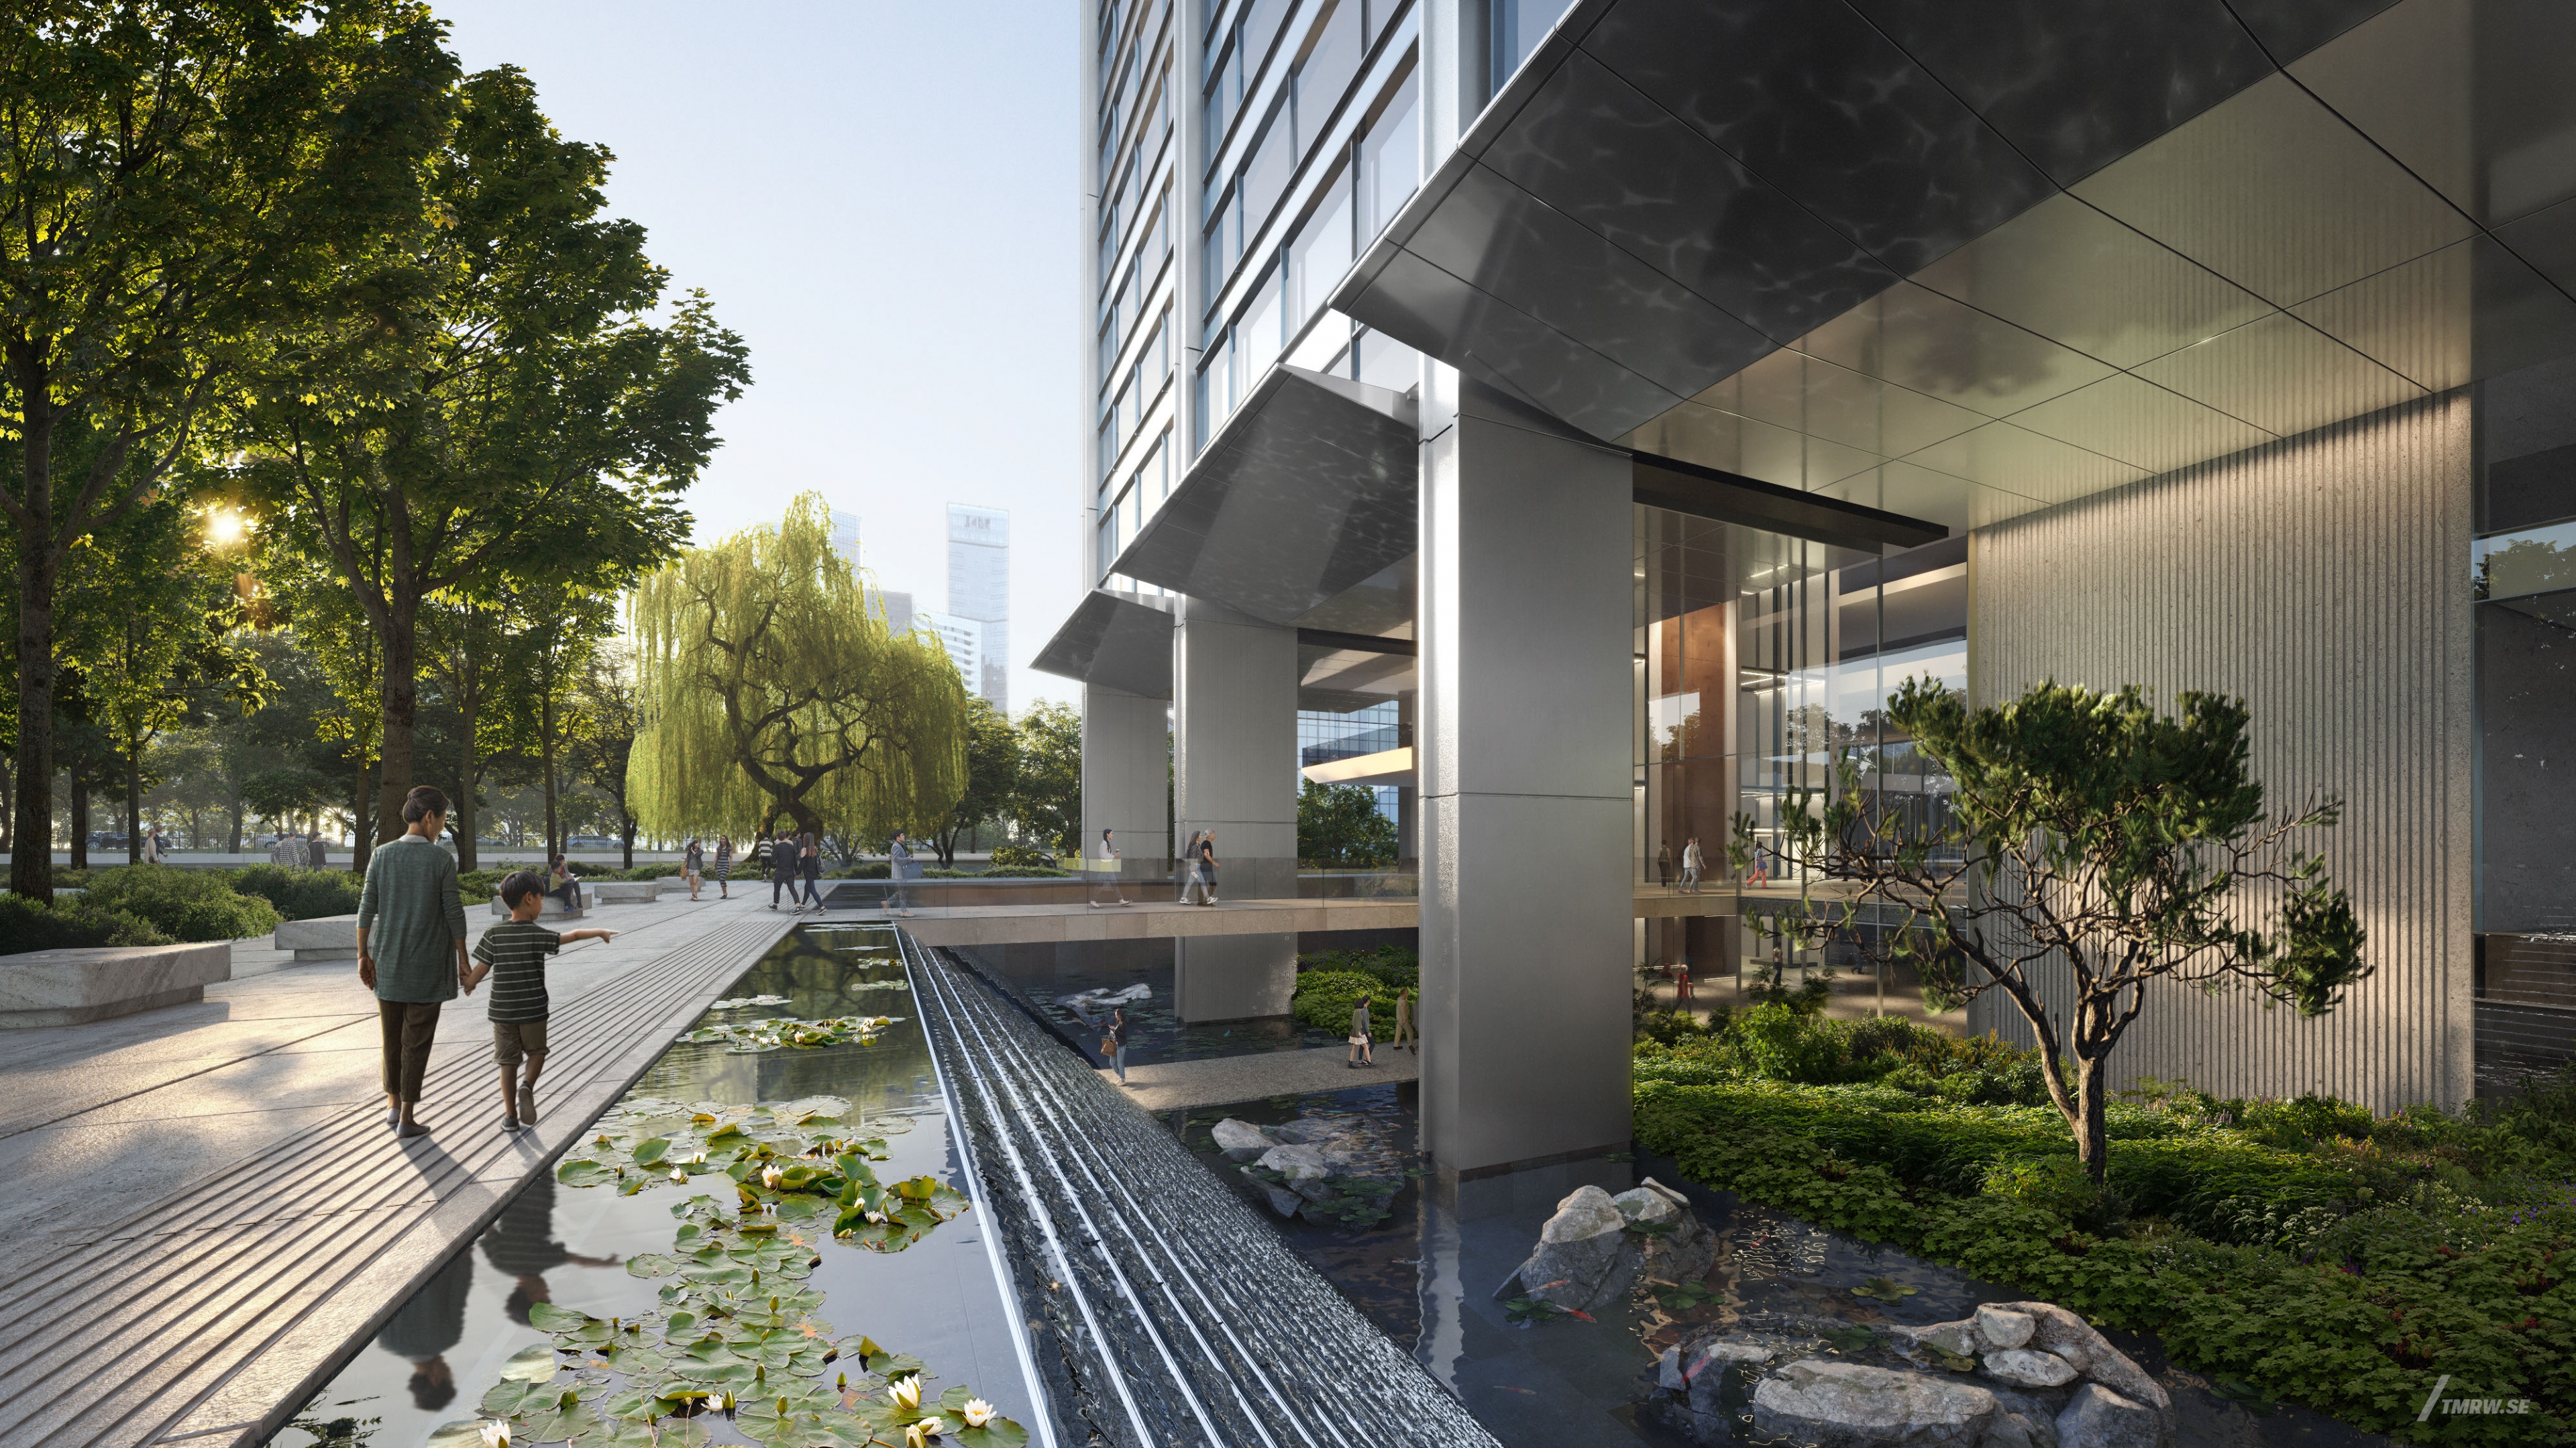 Architectural visualization of Hengli Suzhou for Foster + Partners. An image of a entrance to a office building with plants and a pond infront in daylight from street view.